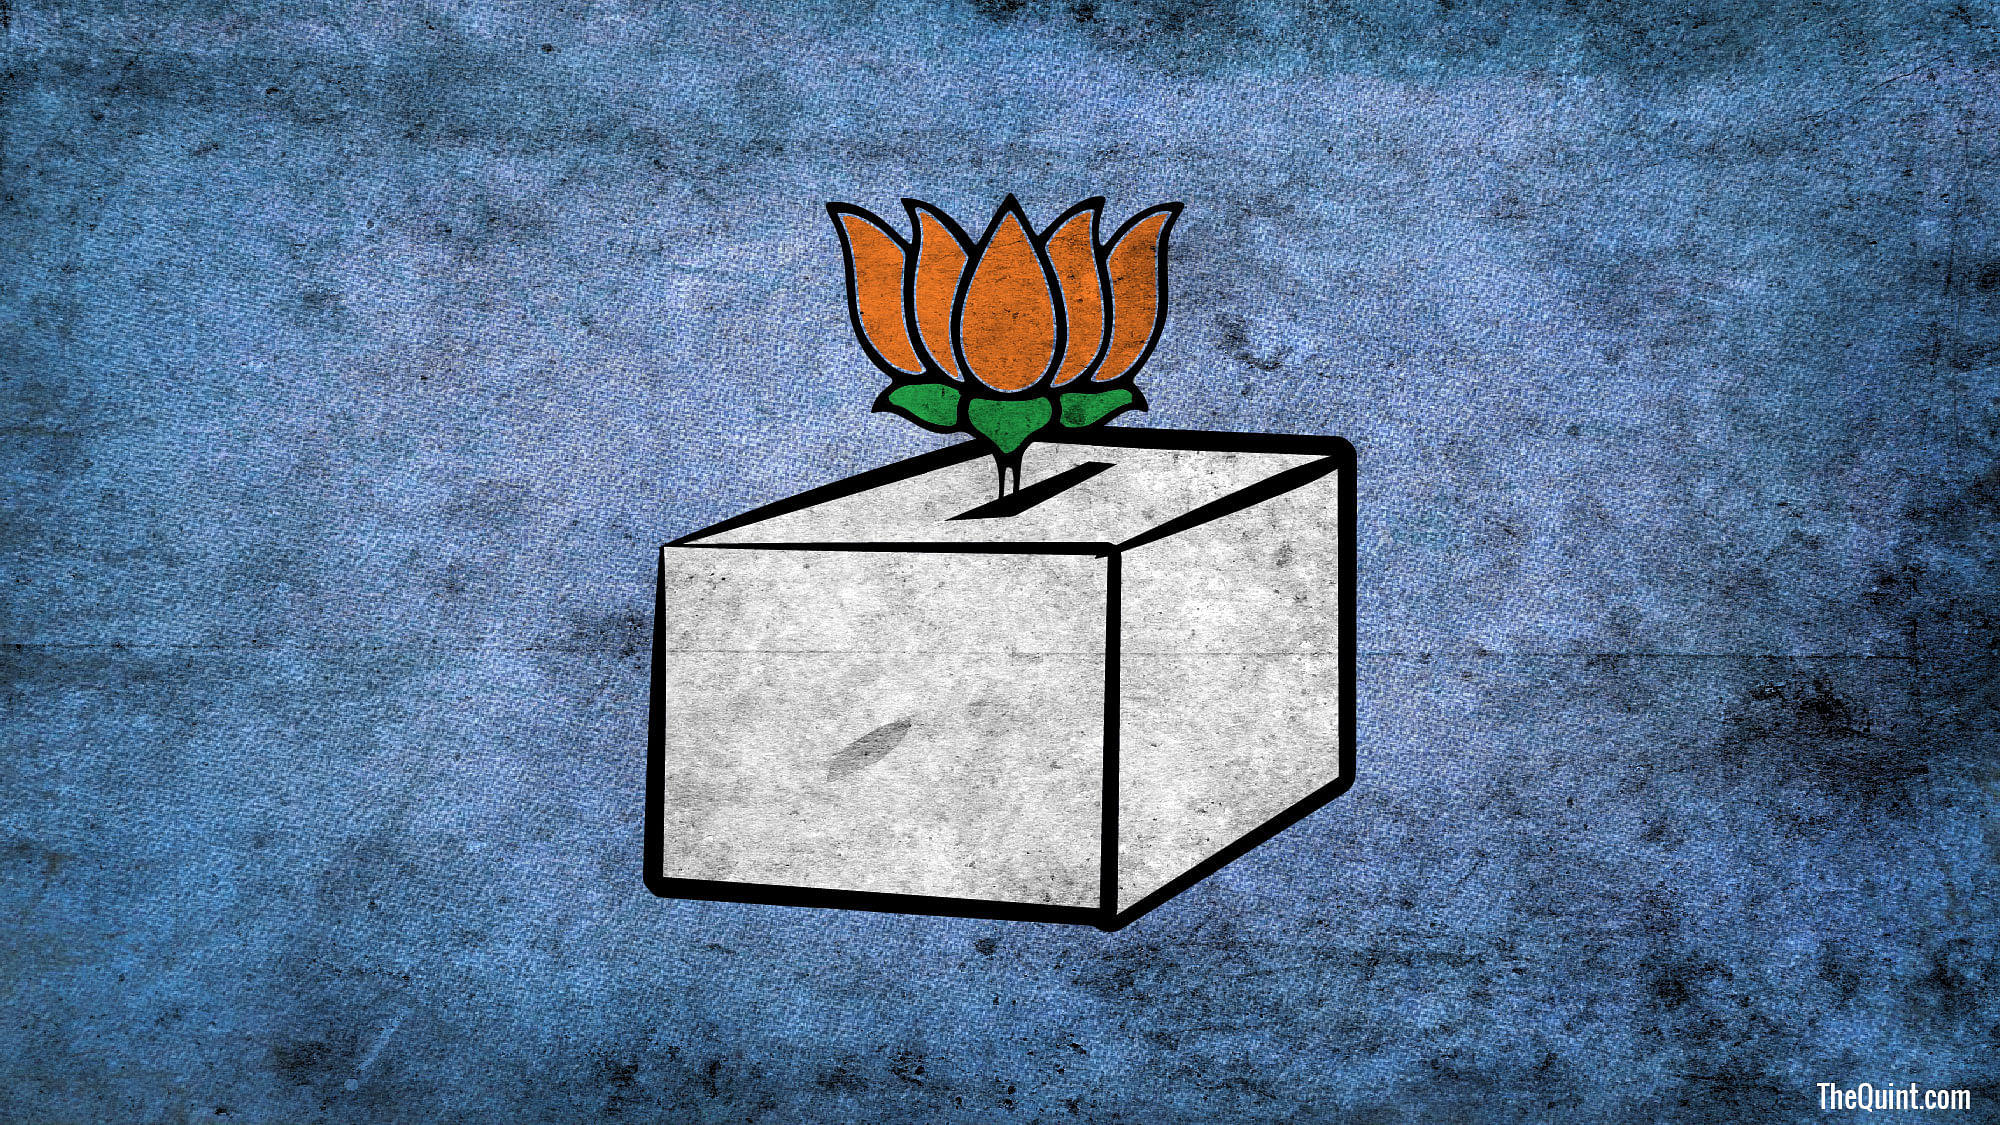 What is in store for the BJP in 2019?